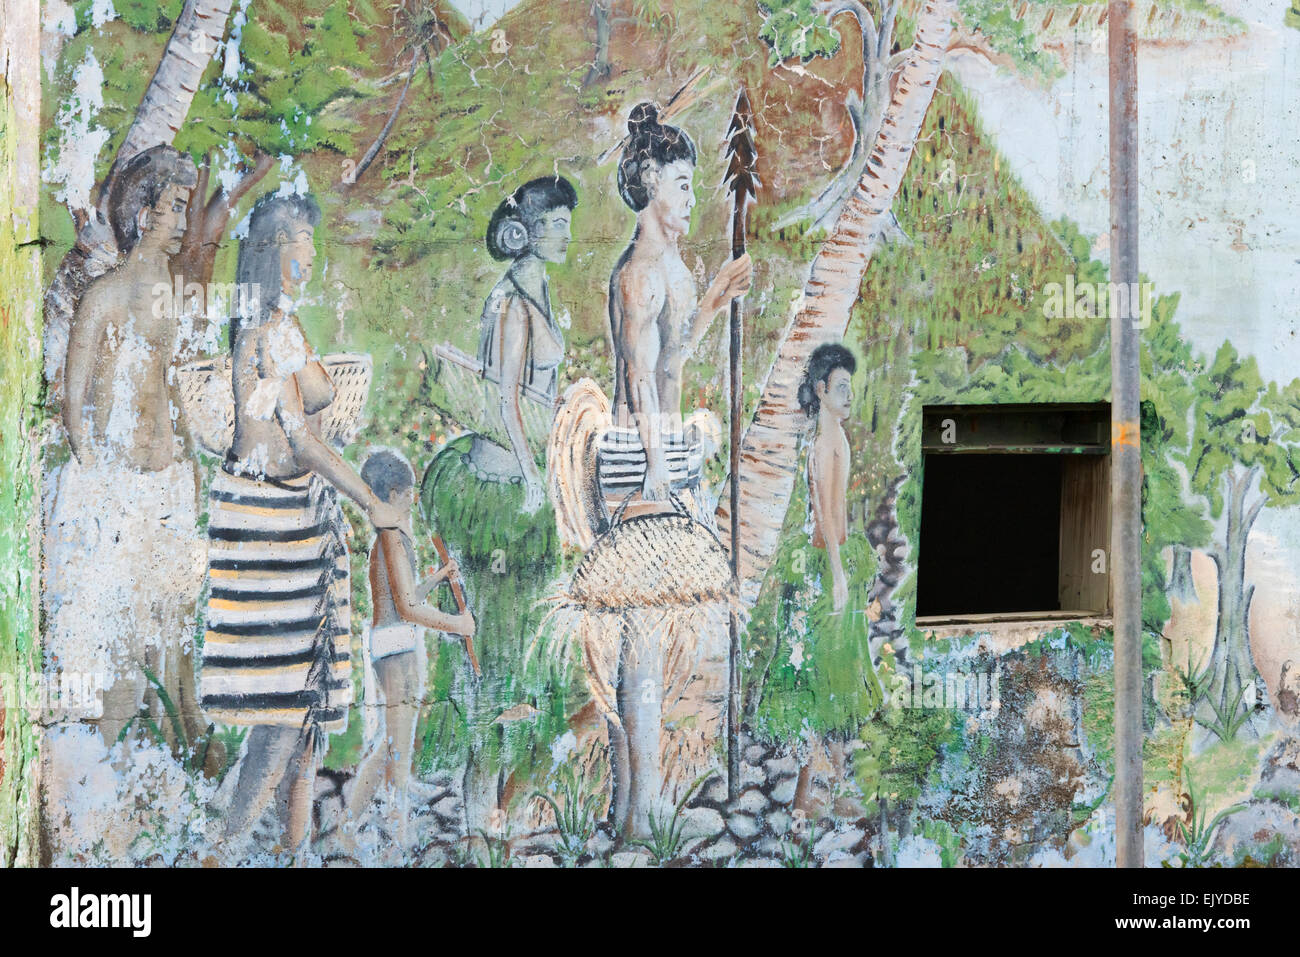 Mural on house, Yap Island, Federated States of Micronesia Stock Photo